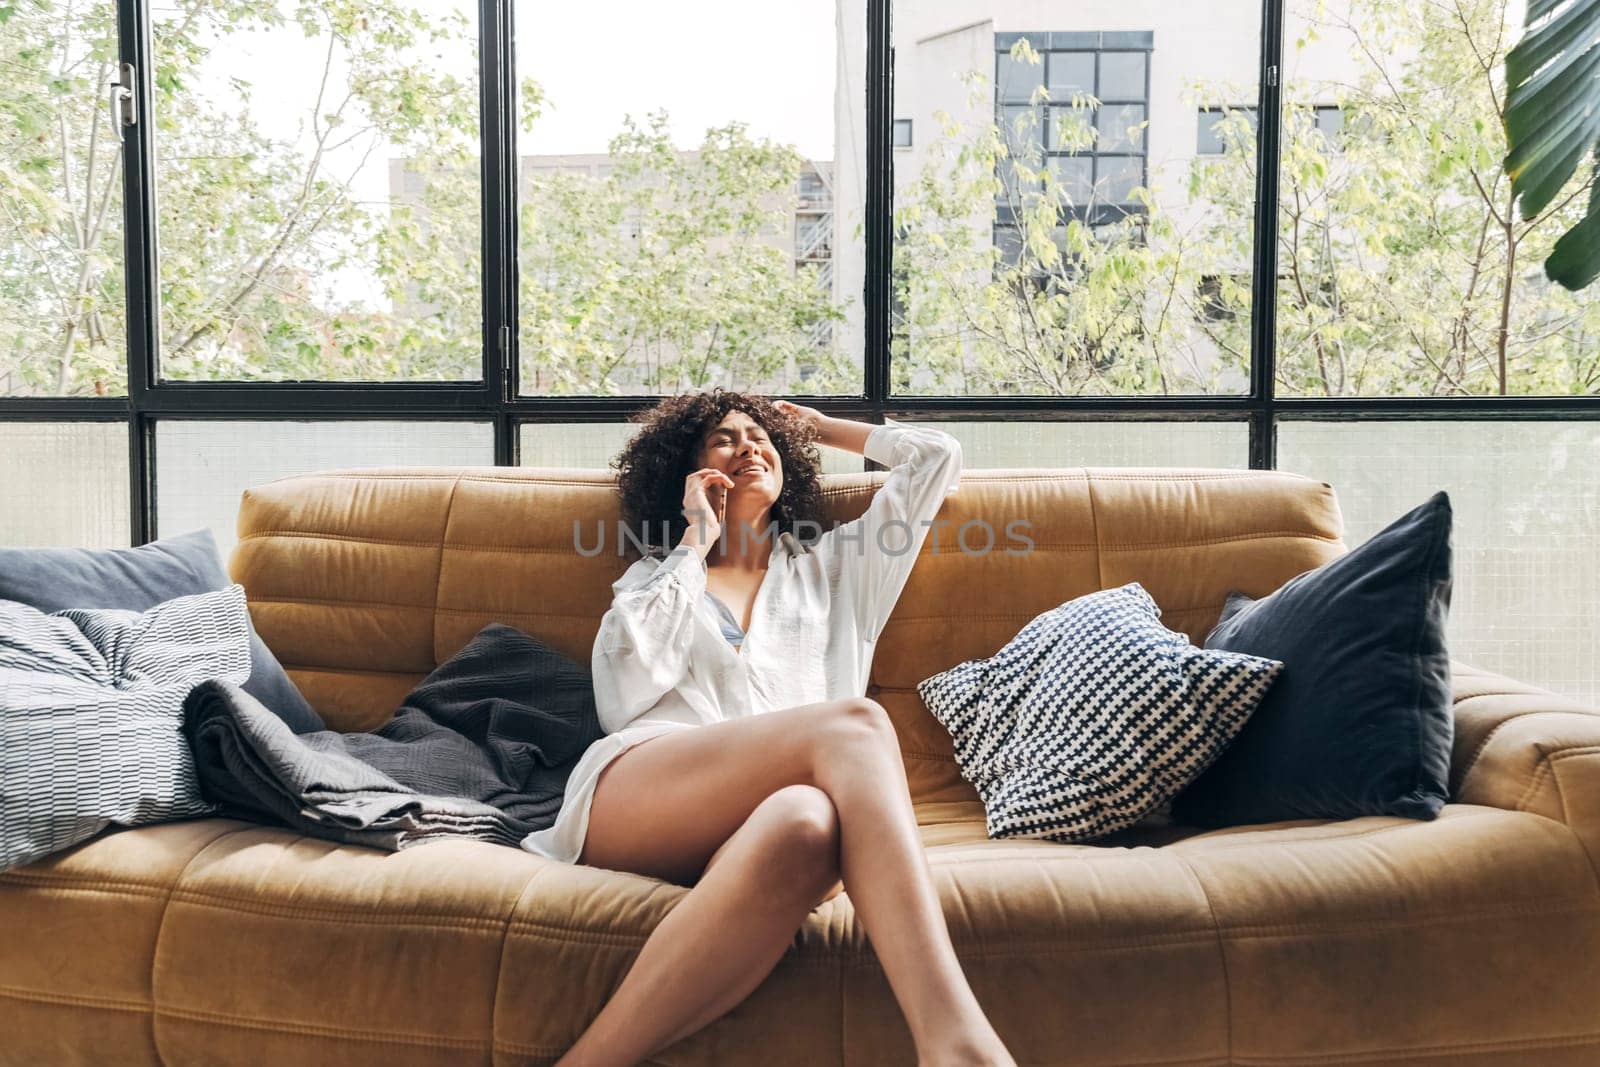 Young African American woman relaxing on couch talking on cellphone in a bright loft living room. Home concept. Technology concept.